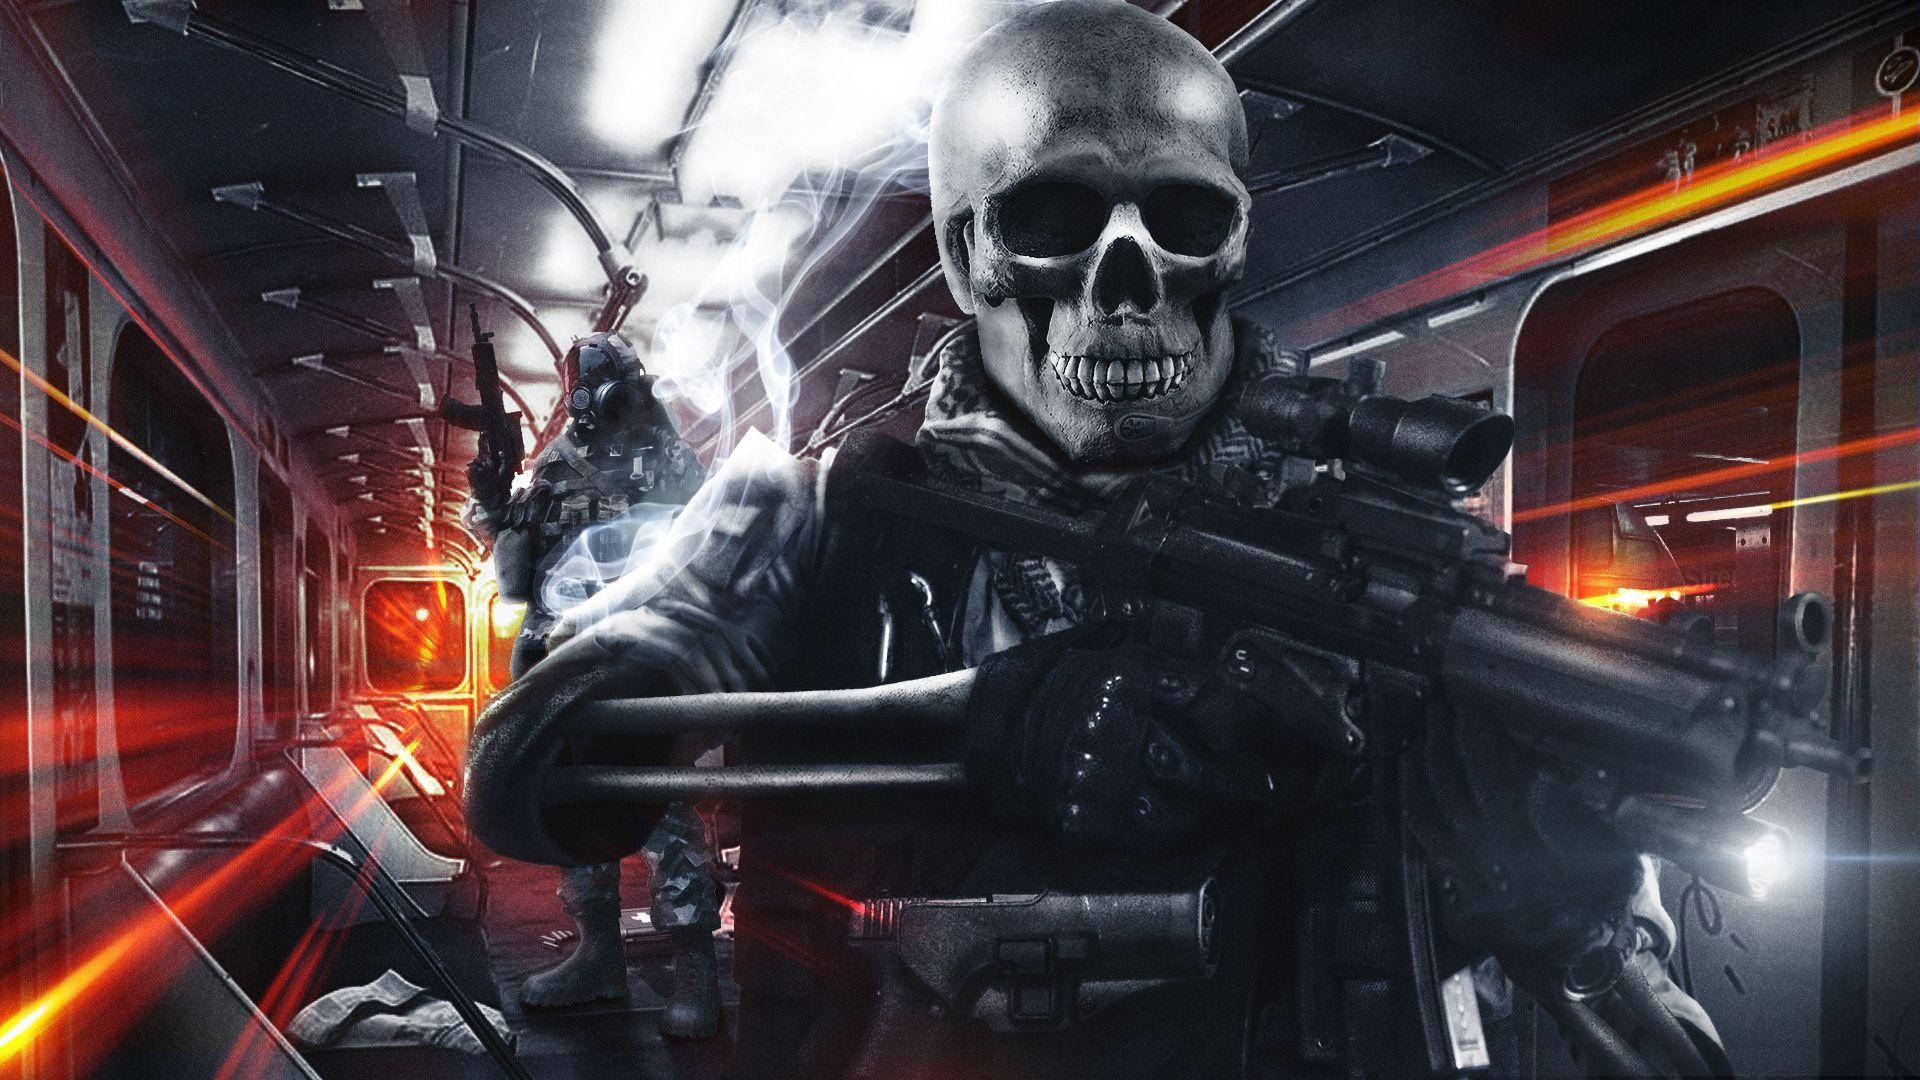 "Join the Fight with Cool Battlefield 3!" Wallpaper